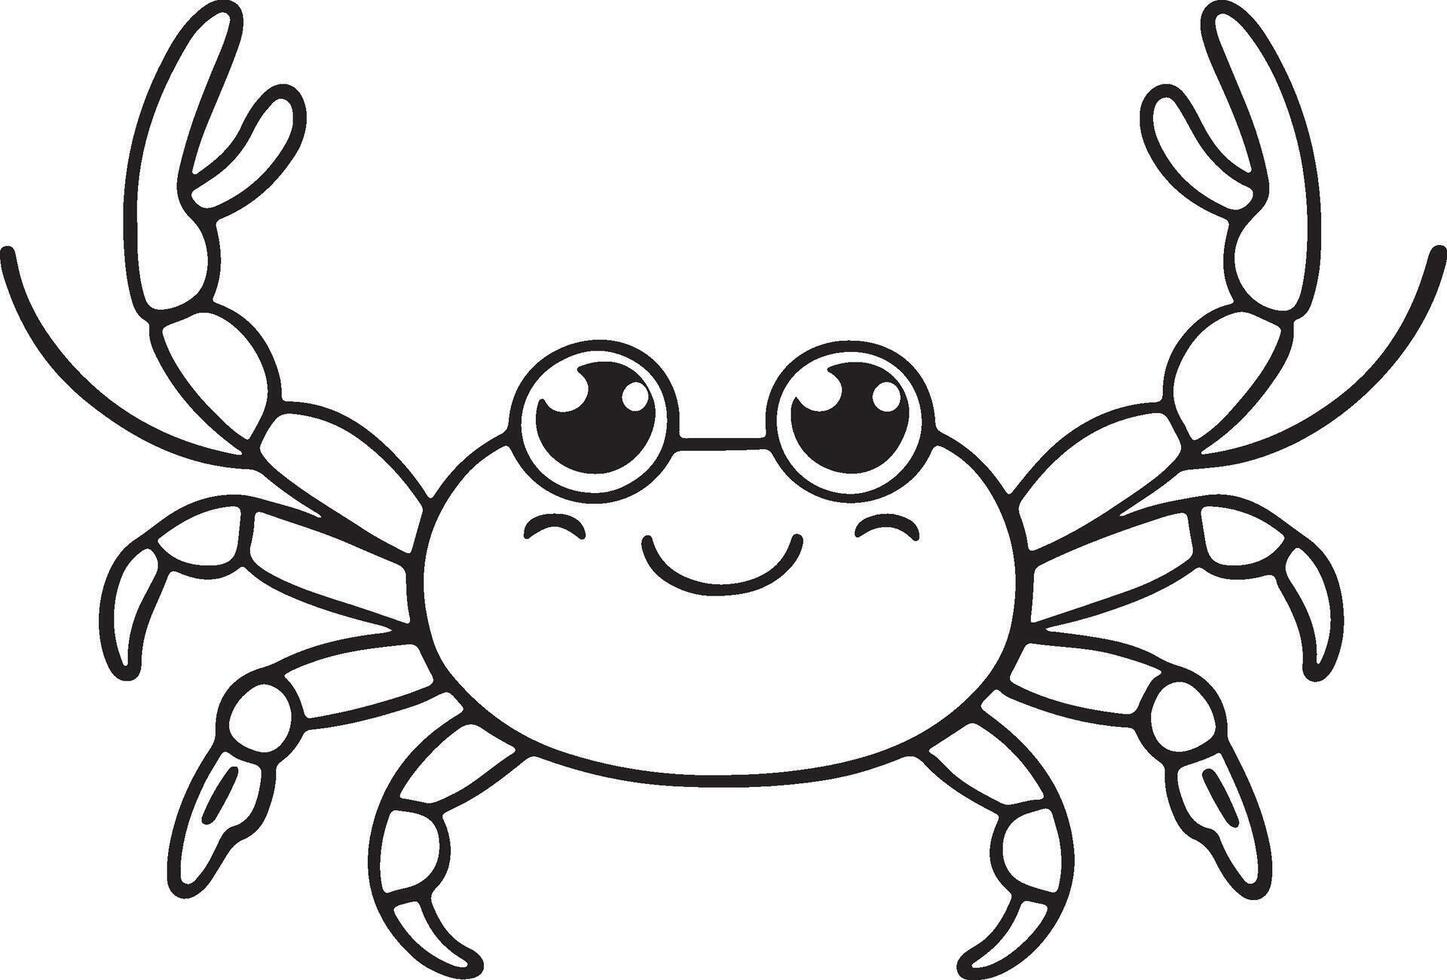 Crab, cute cartoon character, line drawings and colorful coloring pages. vector